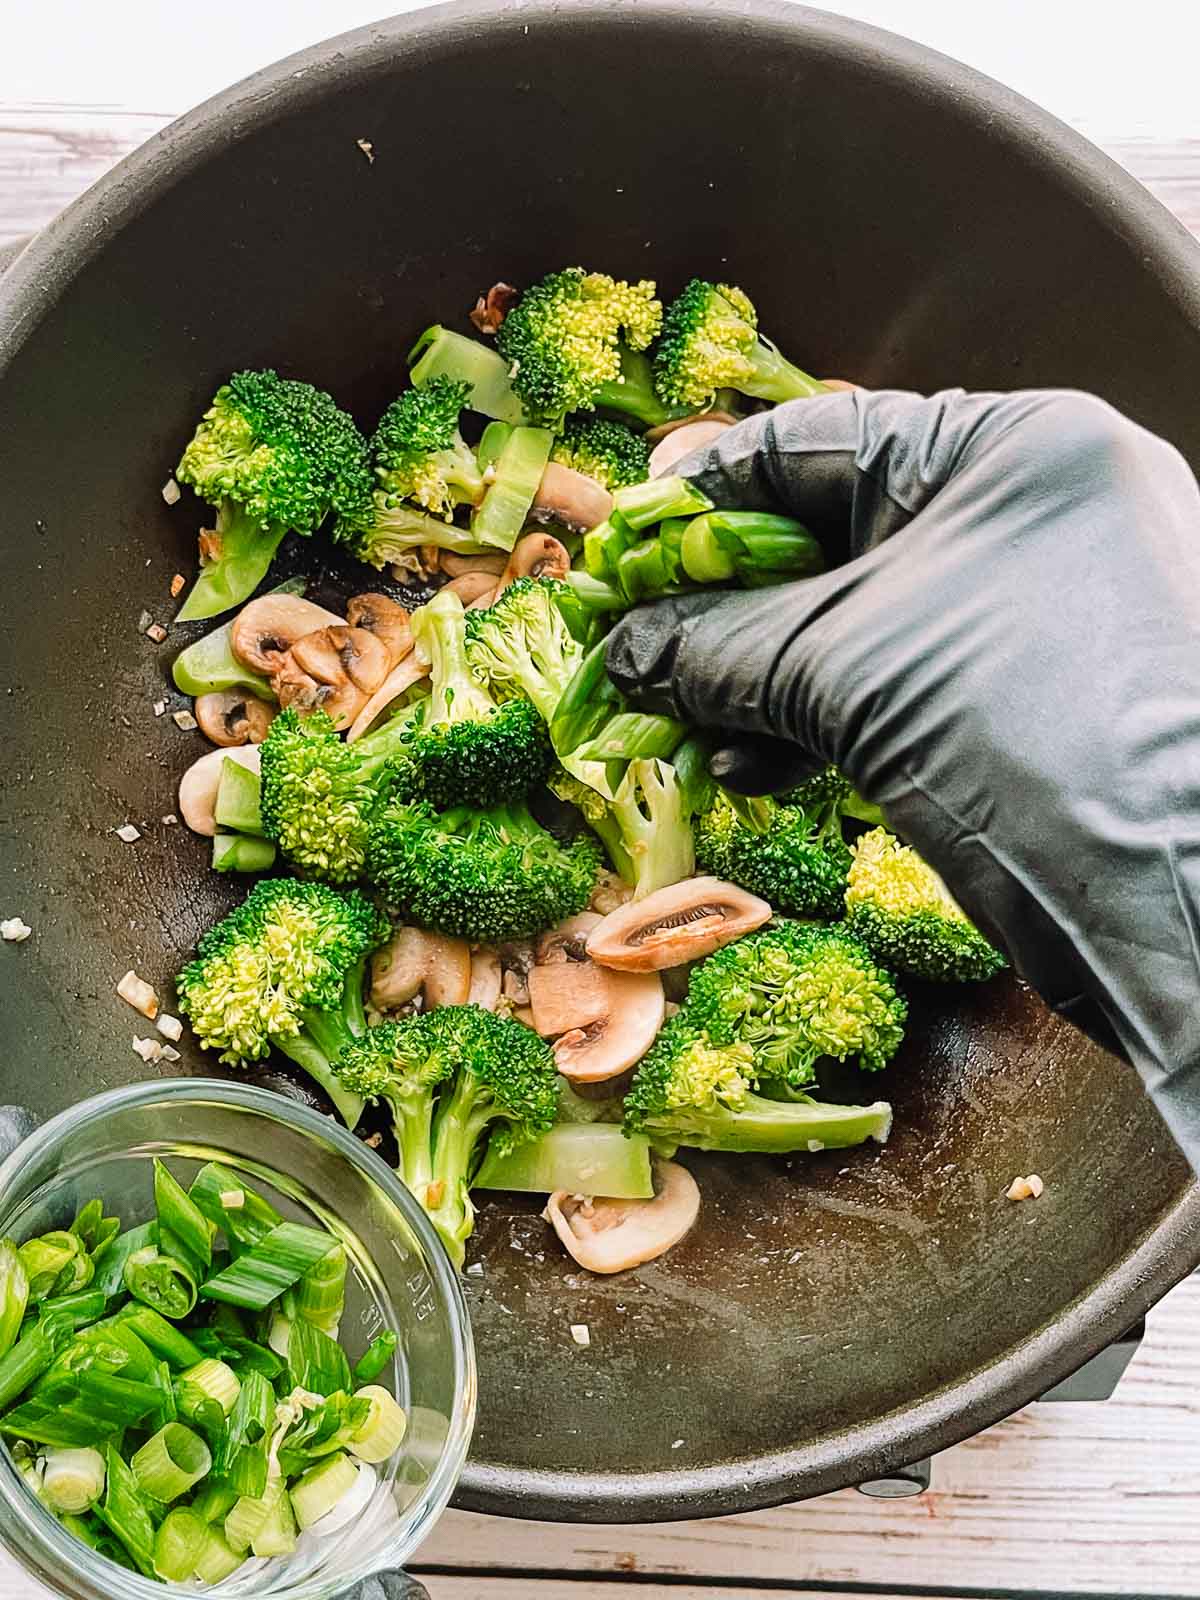 Sliced green onions in a small glass bowl being added to a wok with stir-fried broccoli florets and sliced mushrooms.